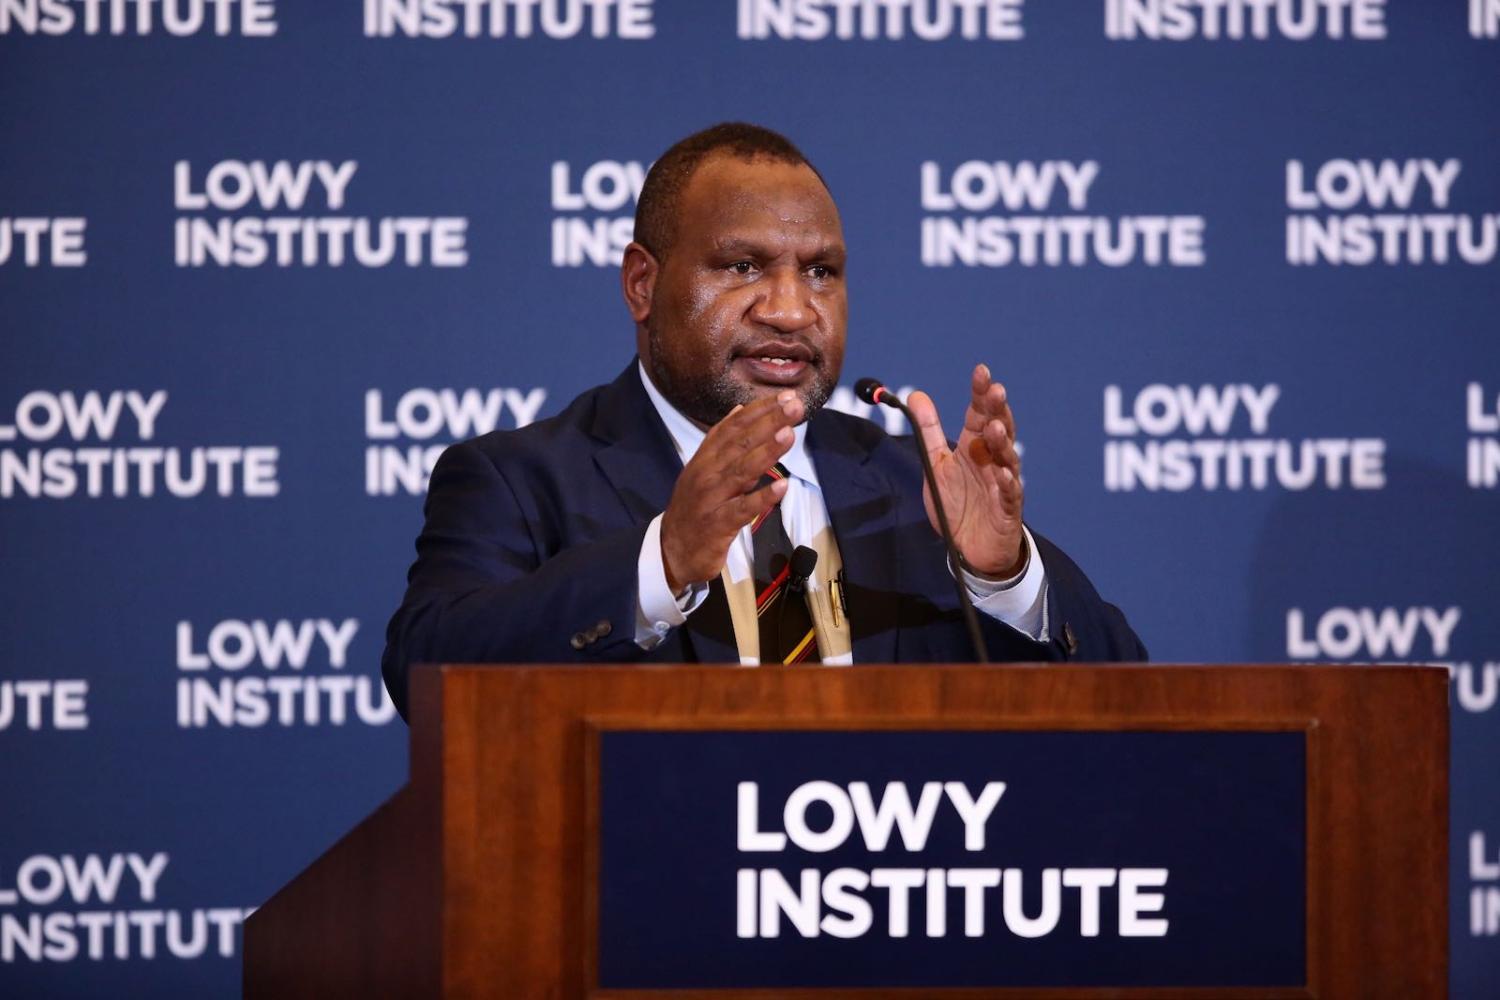 PNG PM James Marape at the Lowy Institute to deliver his first international address since taking office